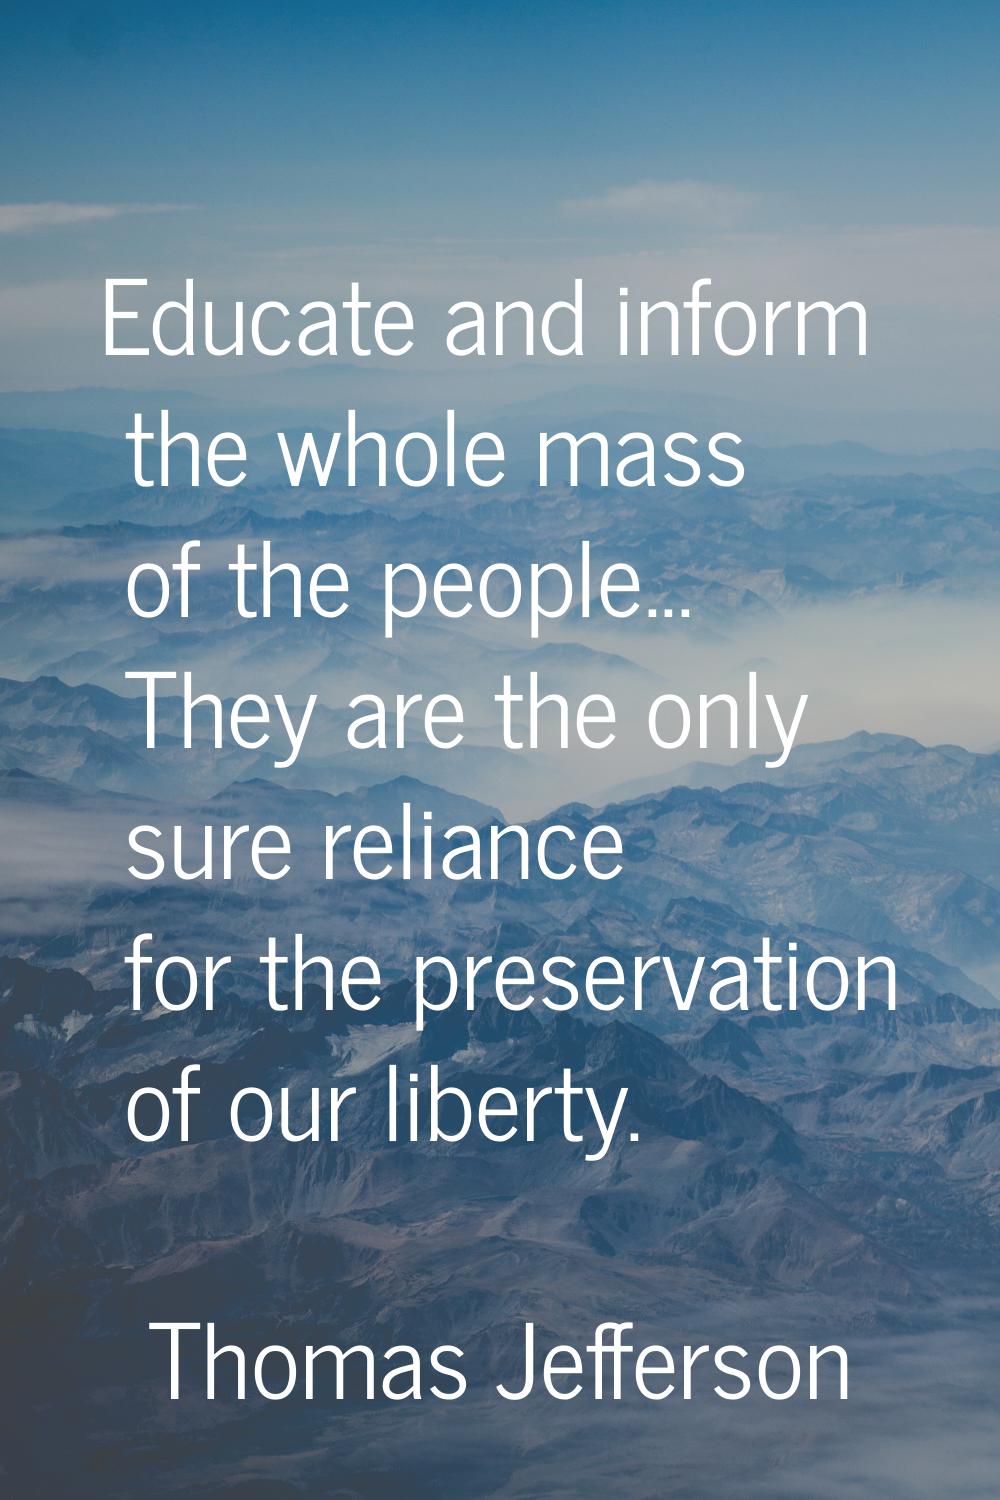 Educate and inform the whole mass of the people... They are the only sure reliance for the preserva